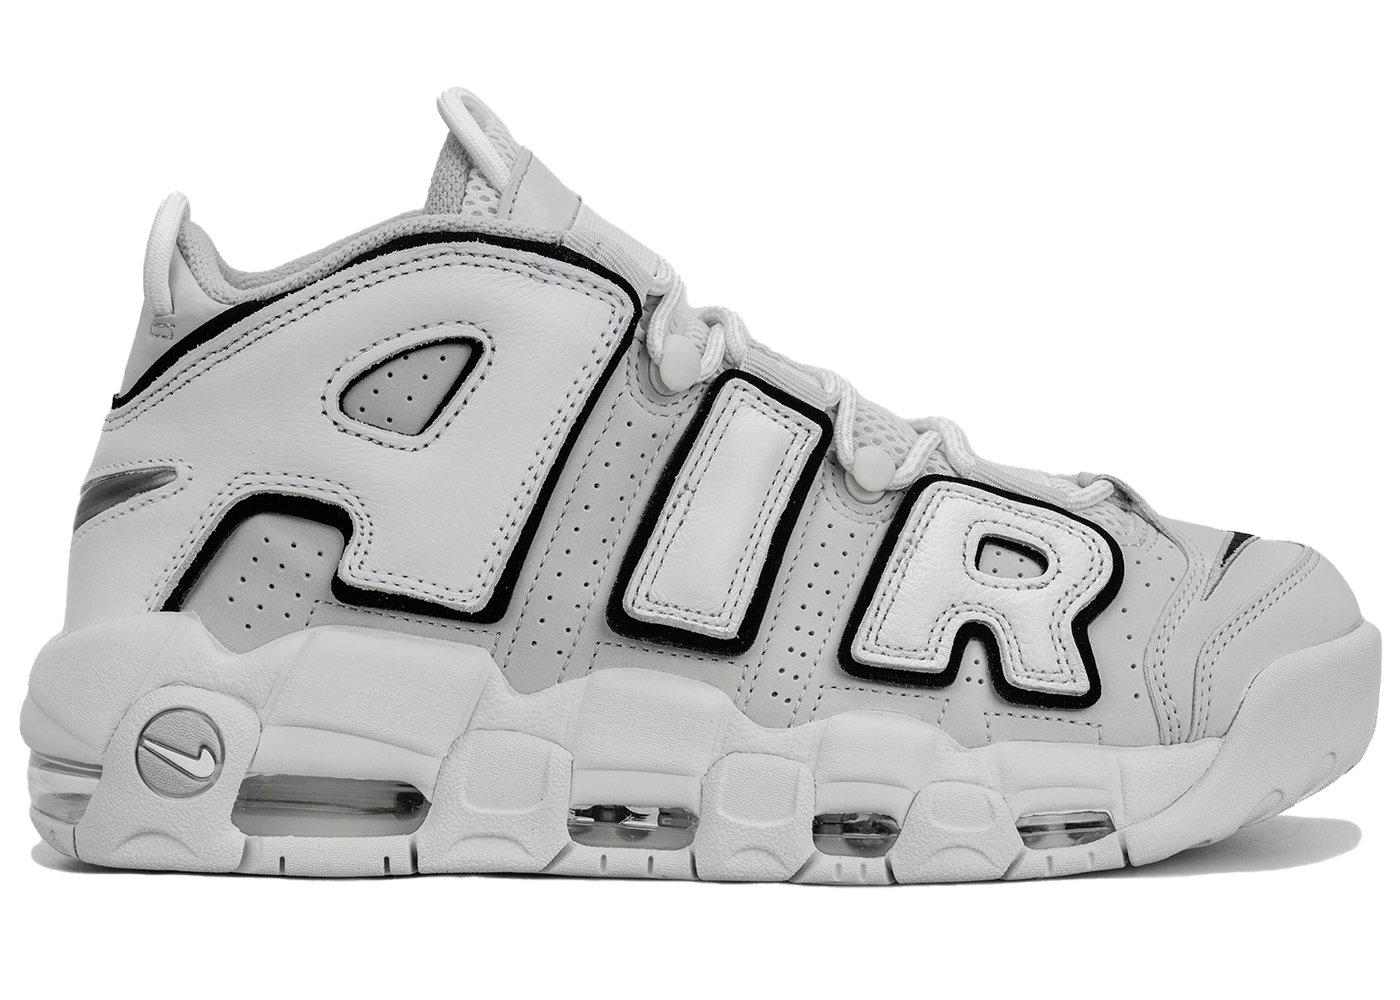 the nike air more uptempo